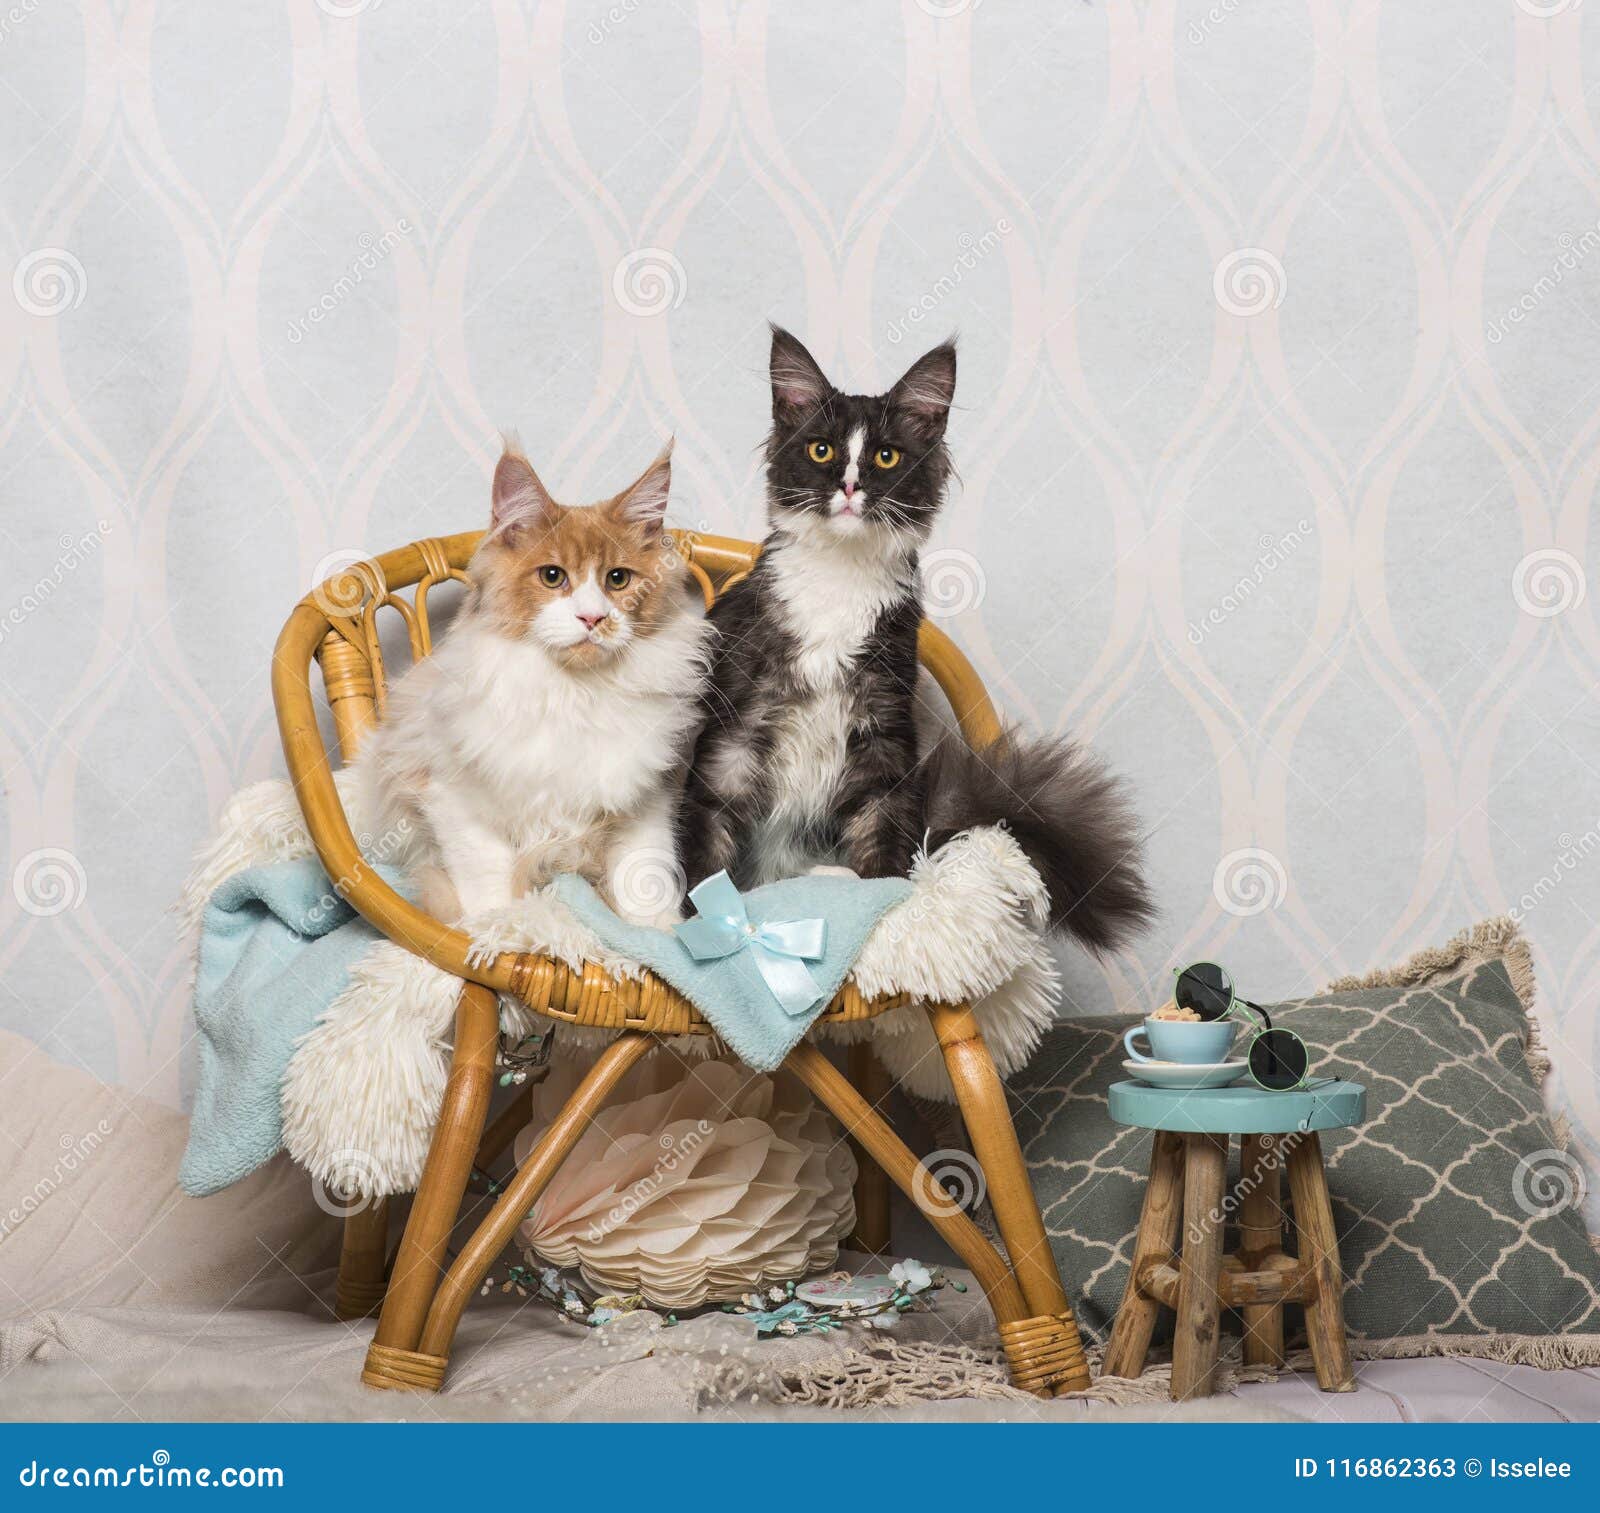 Maine Coon Cats Sitting on Chair in Studio, Portrait Stock Image ...